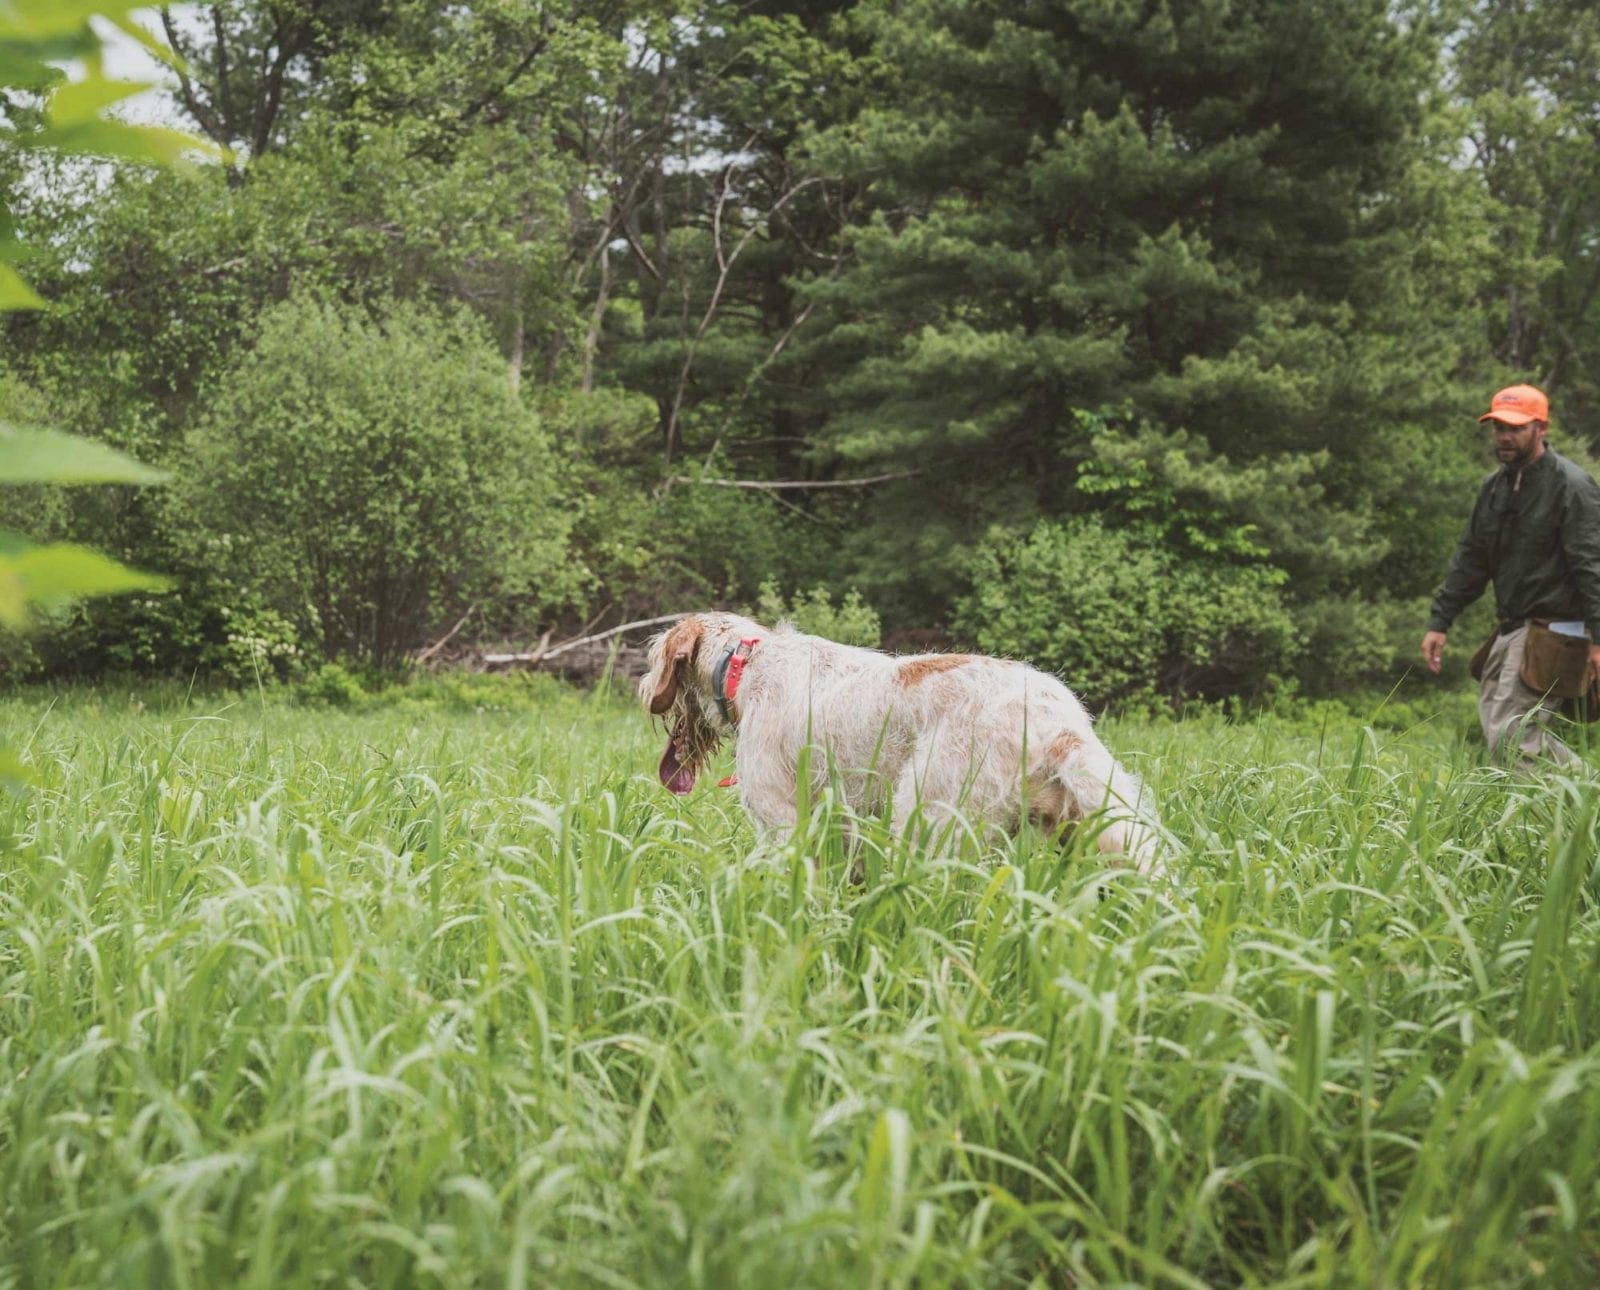 A spinone bird dog experiencing training pressure.